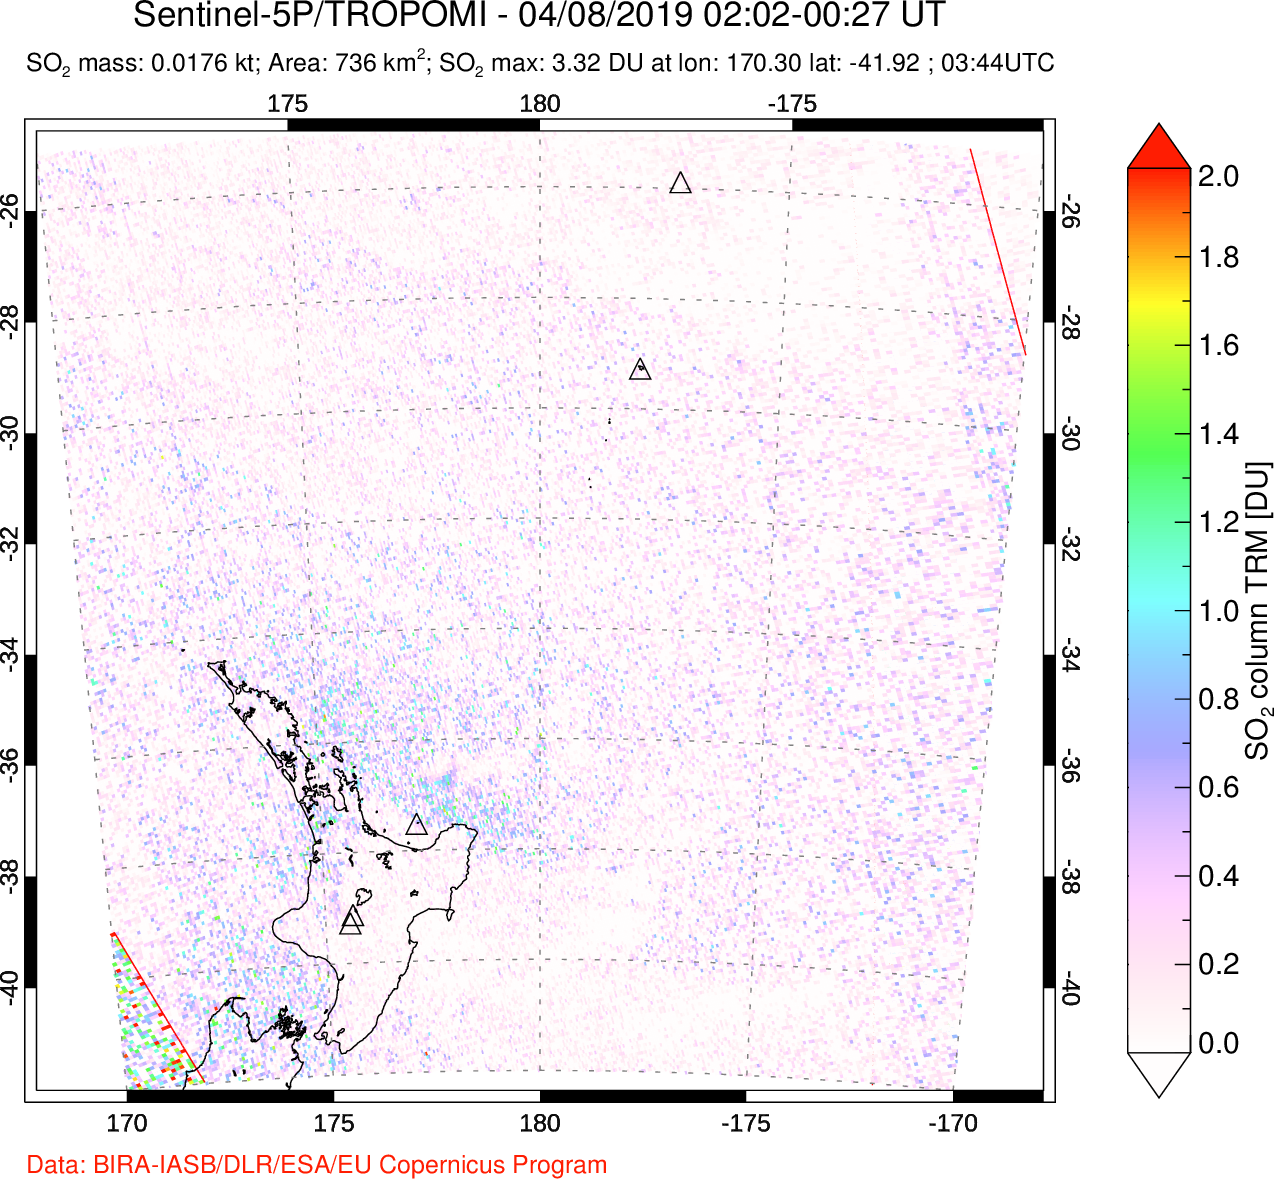 A sulfur dioxide image over New Zealand on Apr 08, 2019.